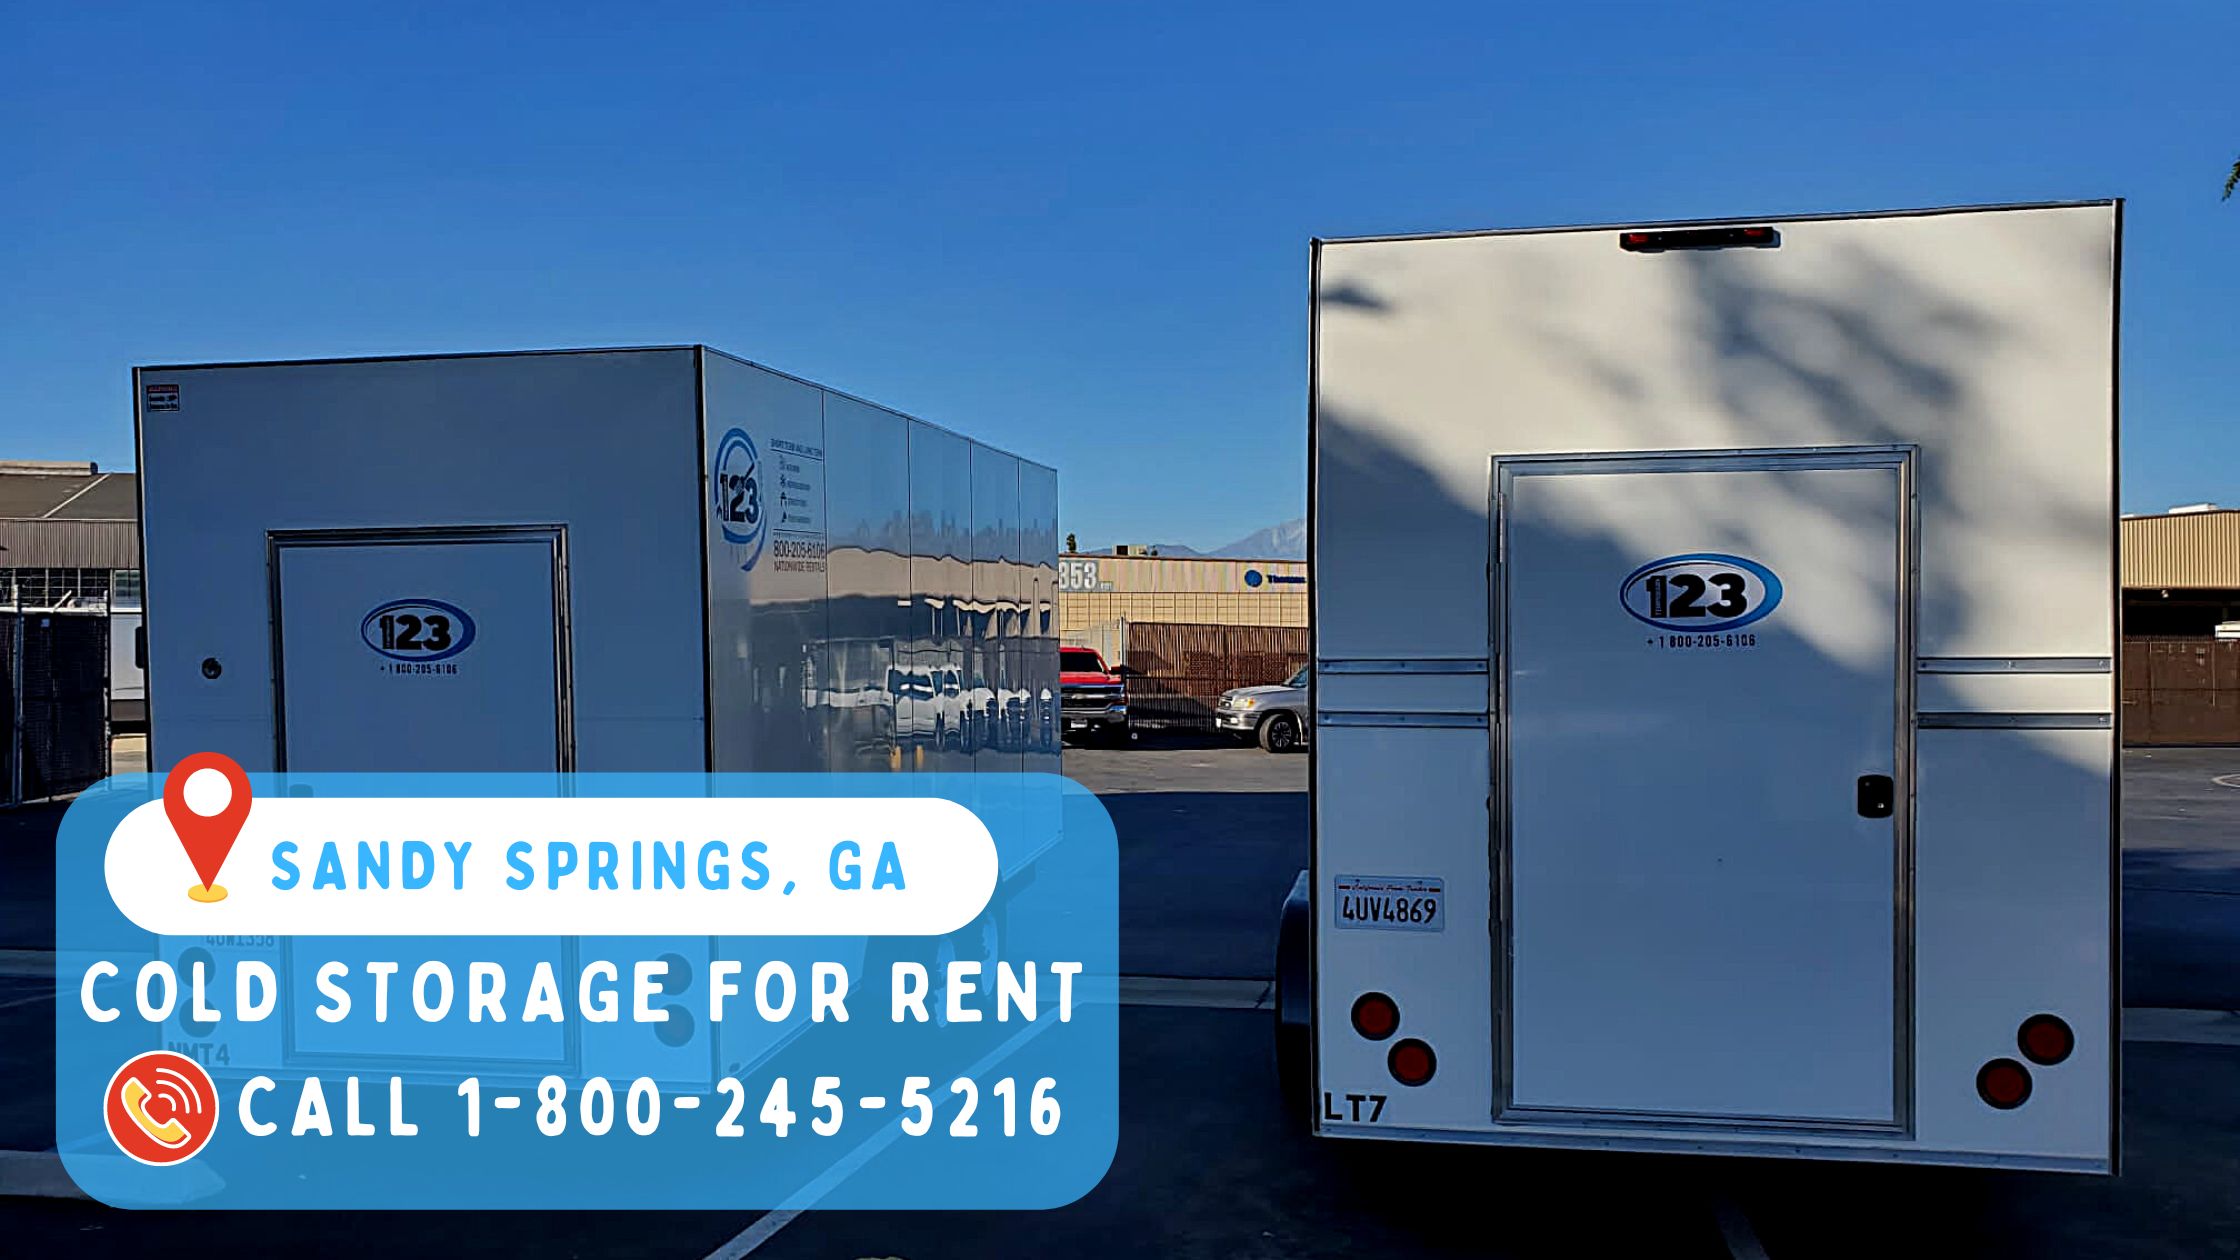 Cold storage for rent in Sandy Springs